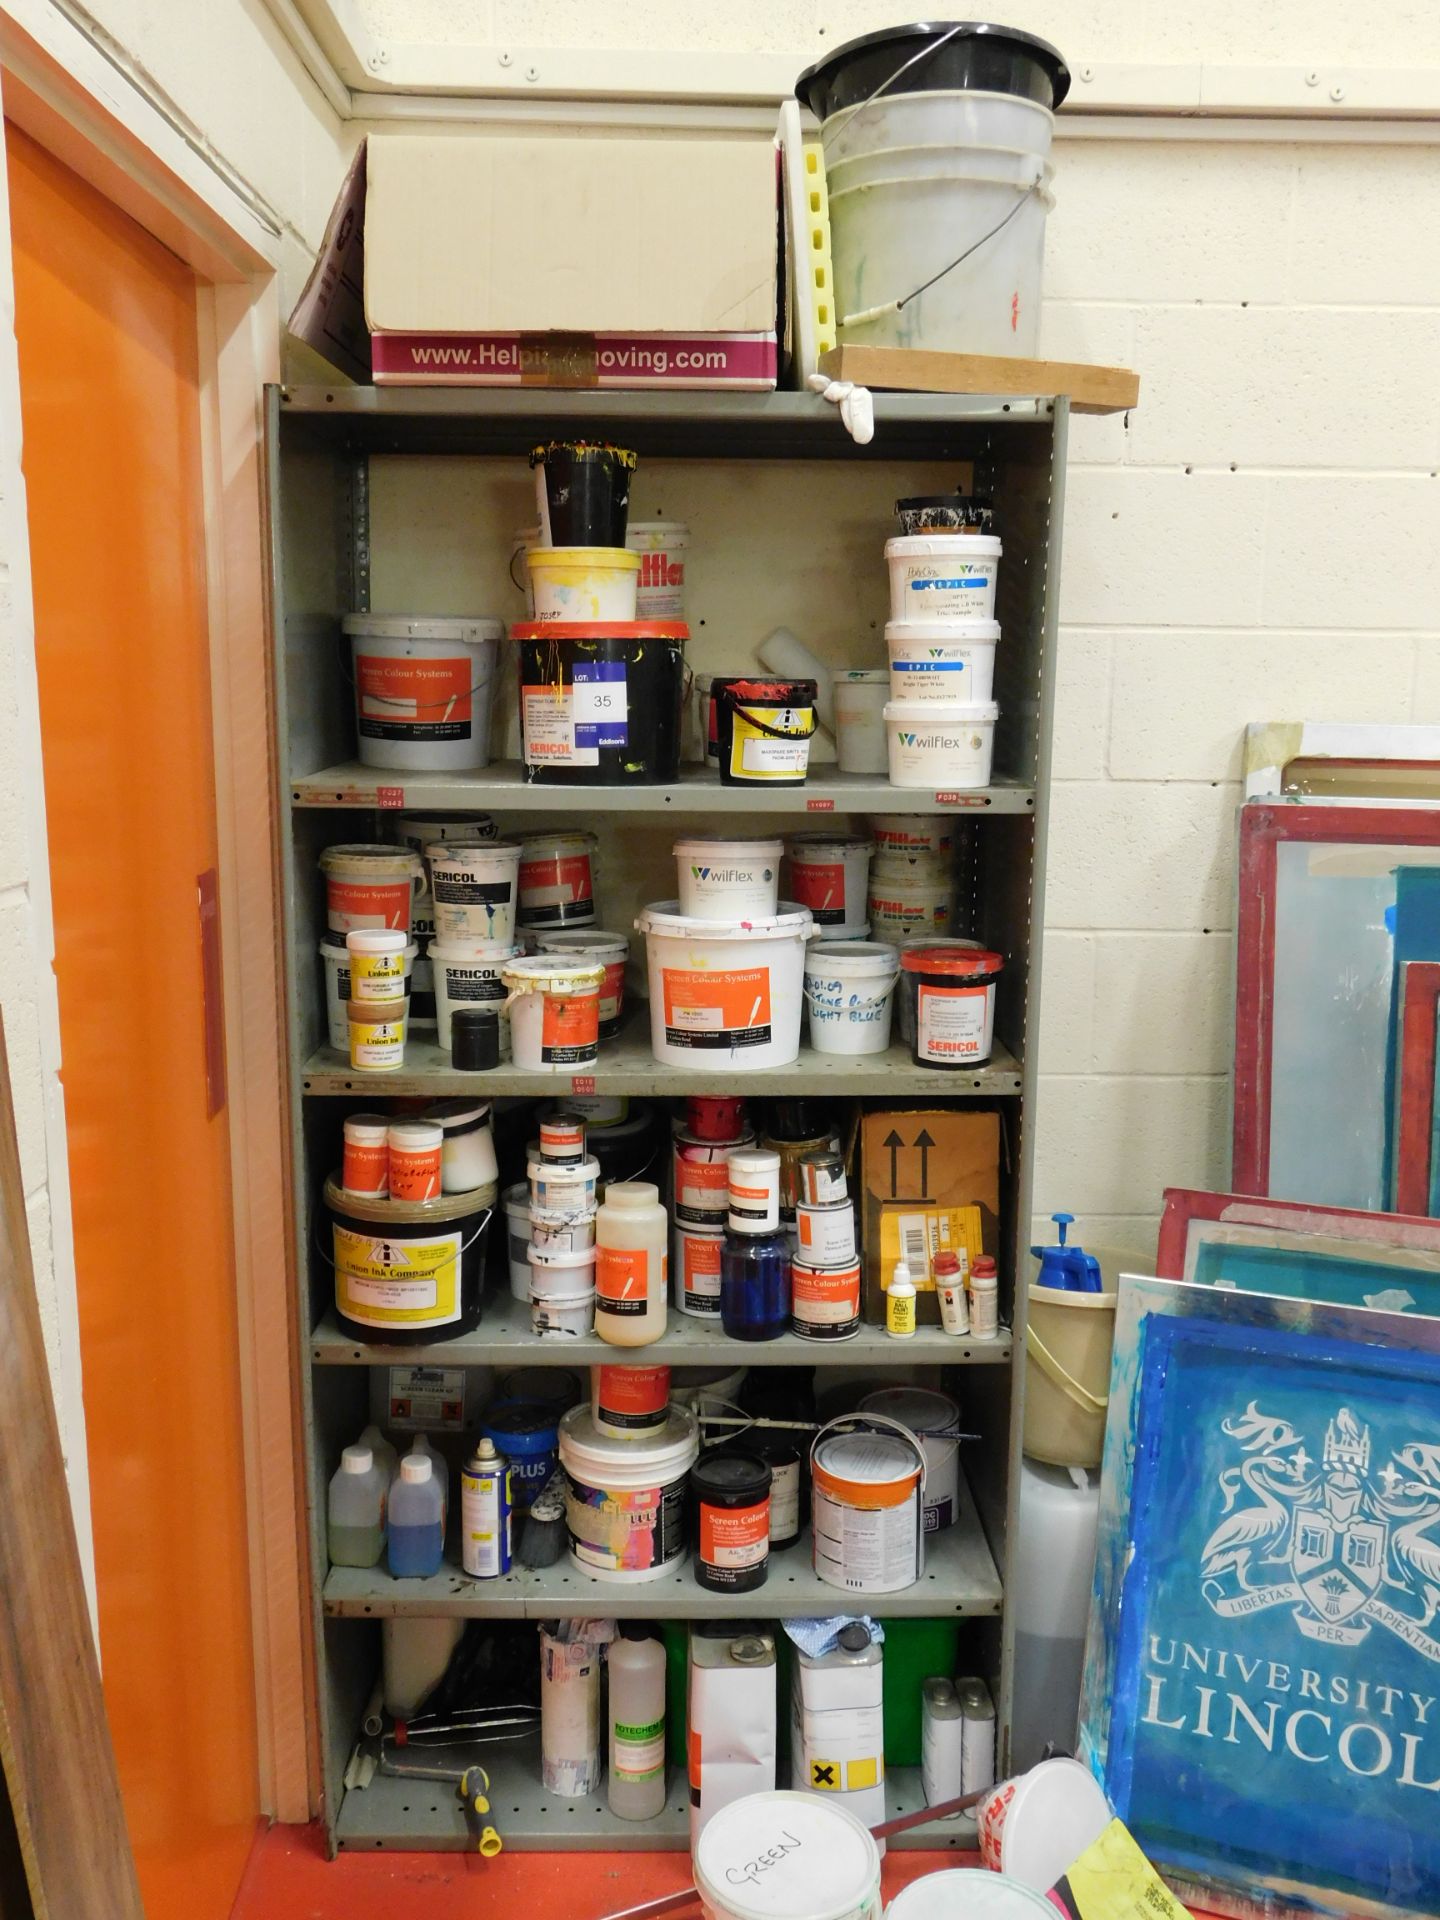 Shelving and contents to include various plastersol inks